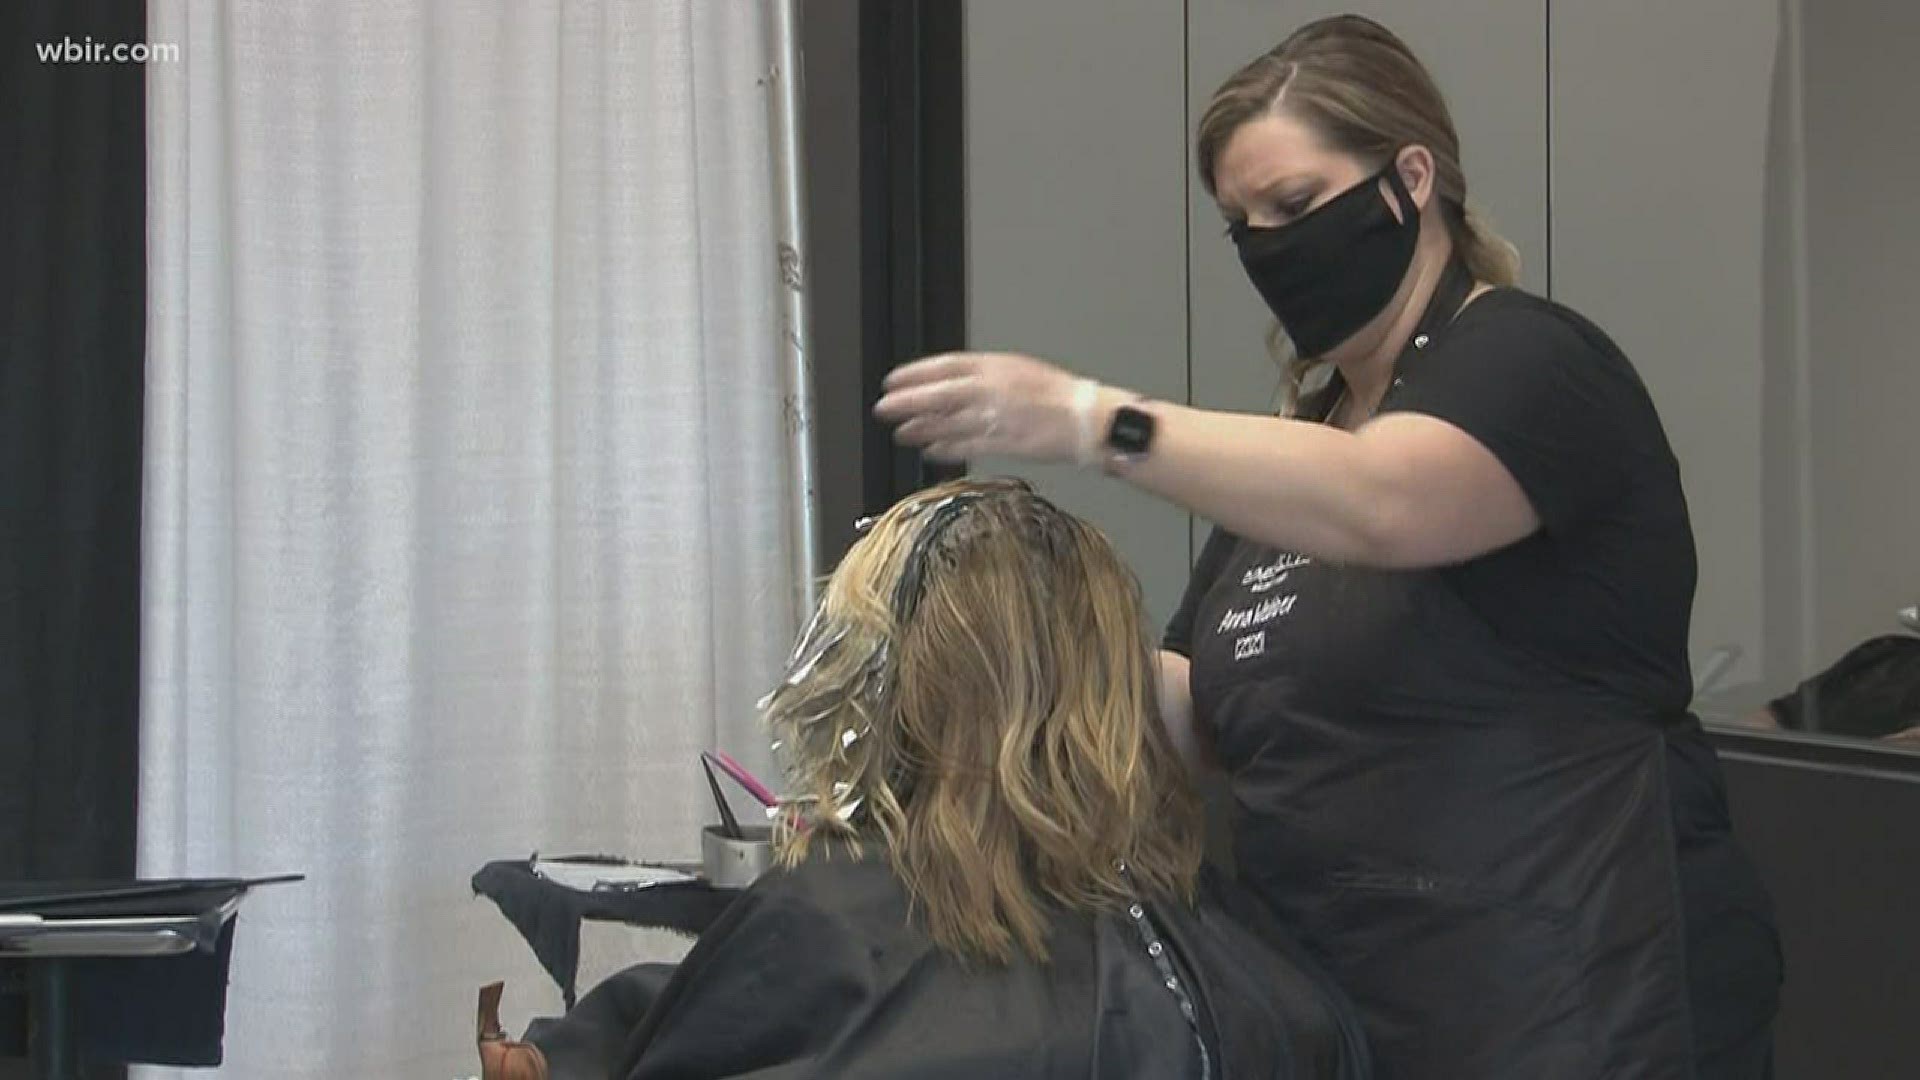 10News reporter Katie Inman spoke to a salon owner who said they are taking extra precautions with customers.